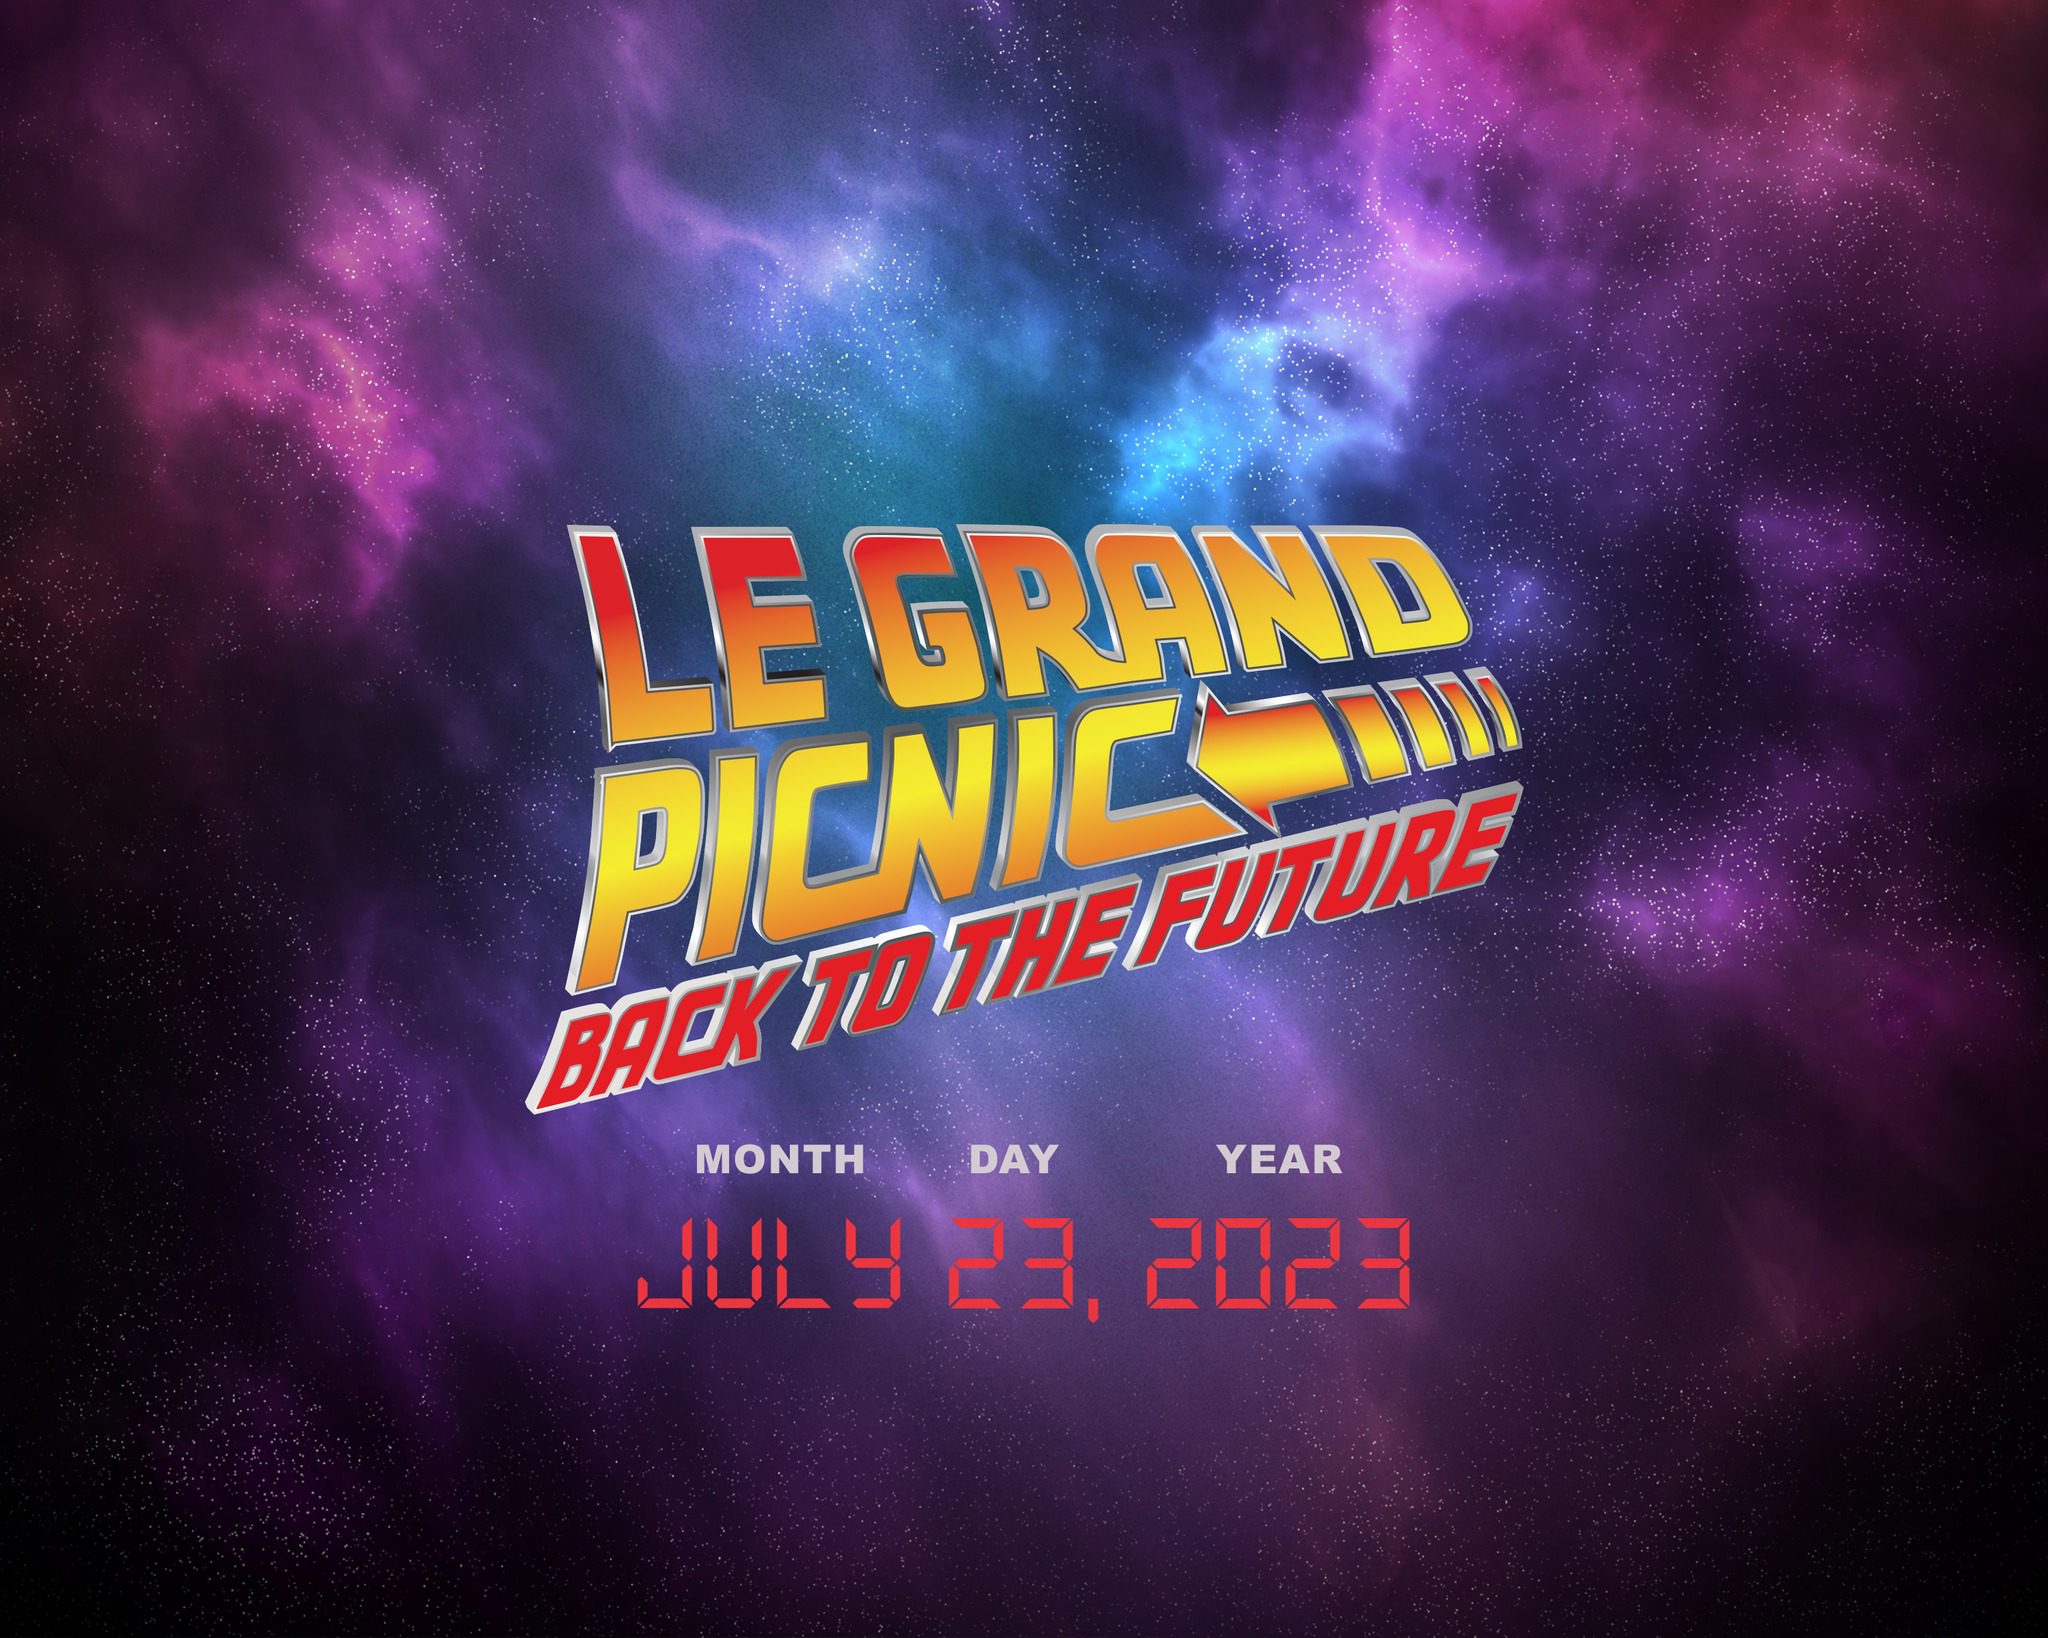 Le Grand Picnic (Back to the Future) at Mountain Communities Hospital on the RimLocal™ Events Calendar